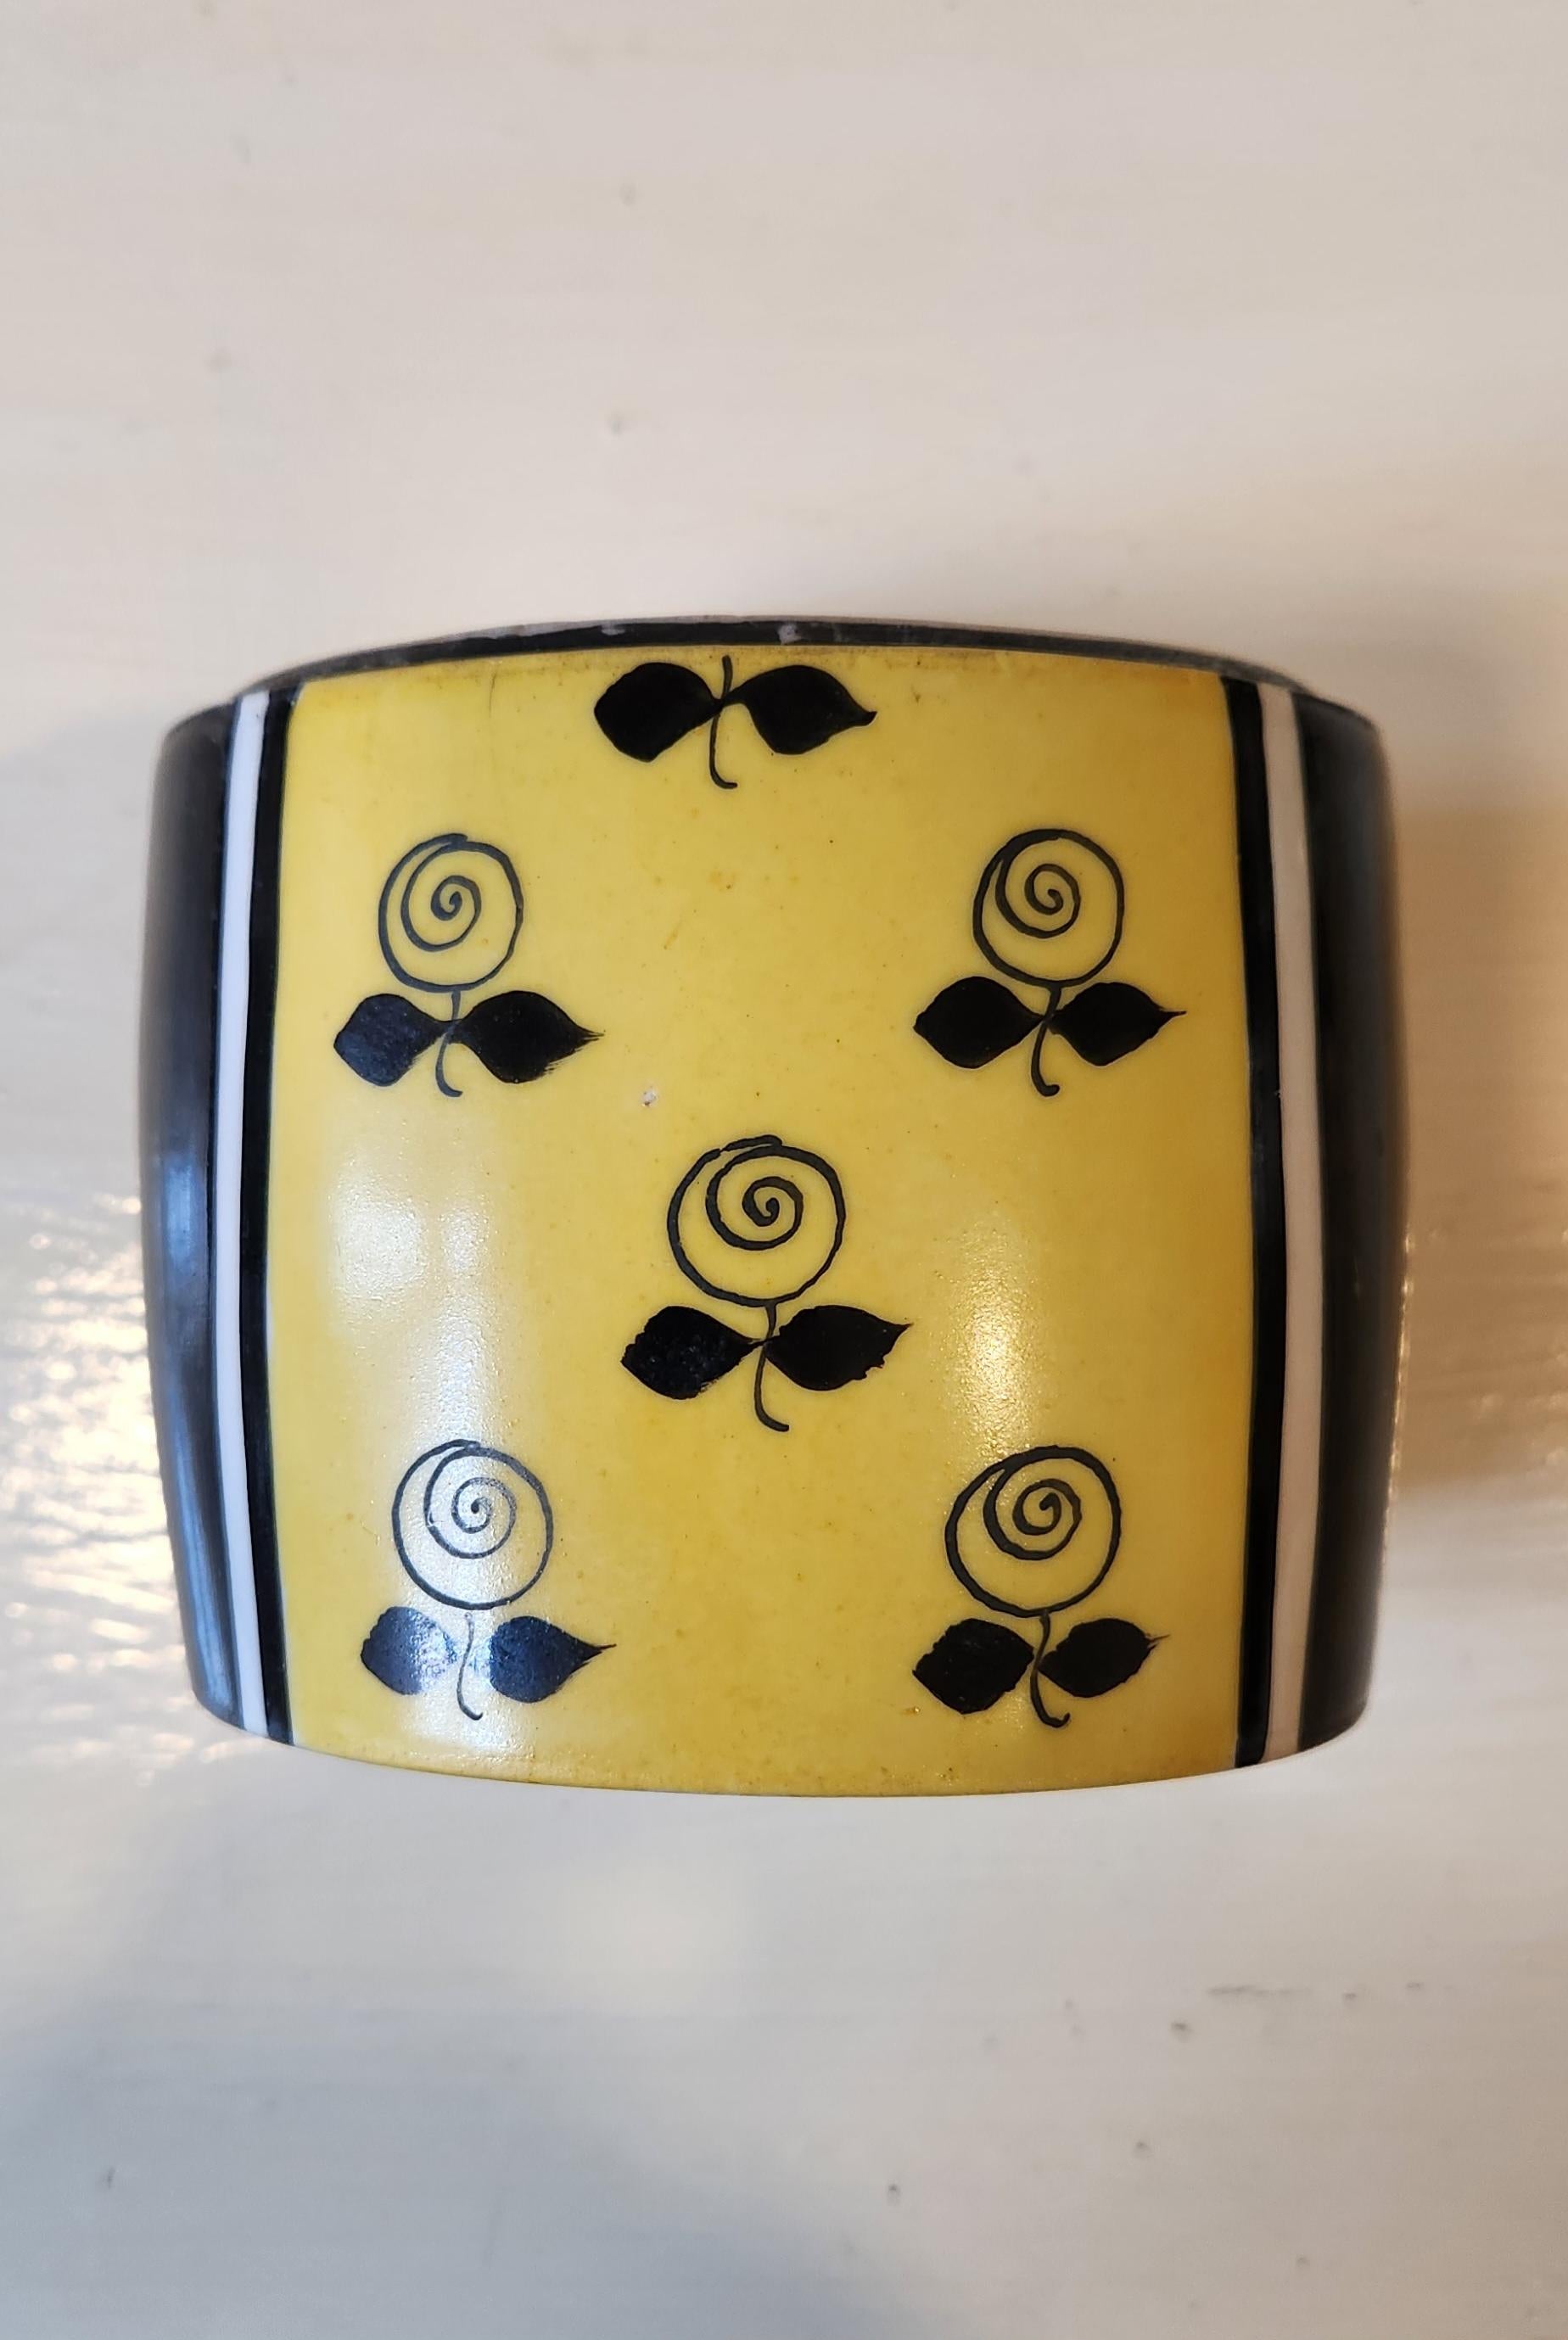 This lovely powder box in an art deco style features a woman in a black and yellow patterned dress. The box is French porcelain, made and hand painted in Limoges. The marks are at the bottom of the piece, as well as inside of the top. There are